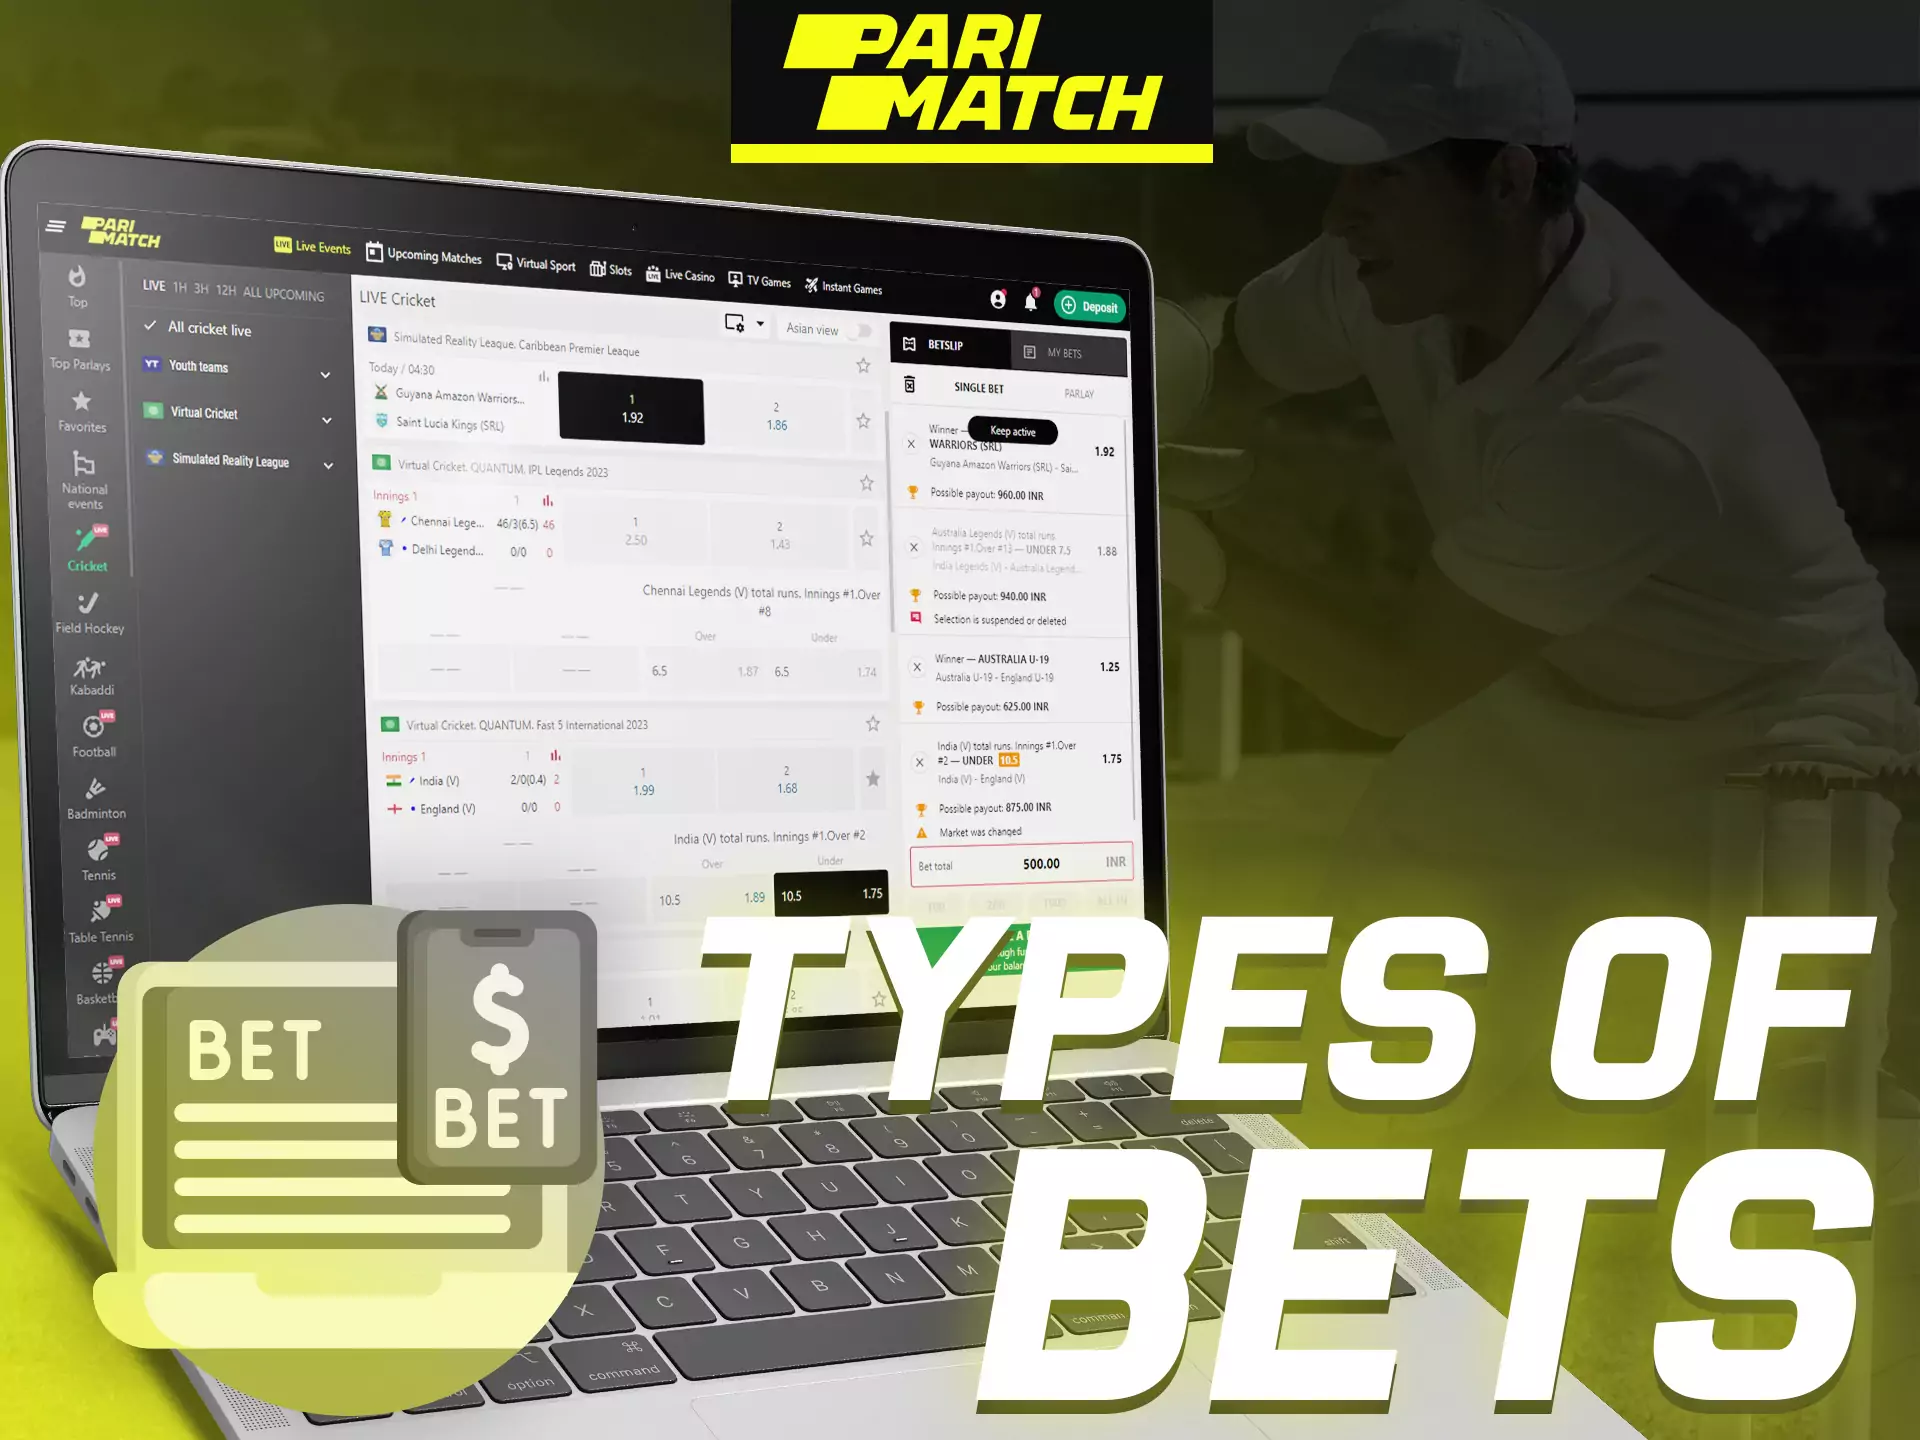 Create your own bet with Parimatch different types of bets.